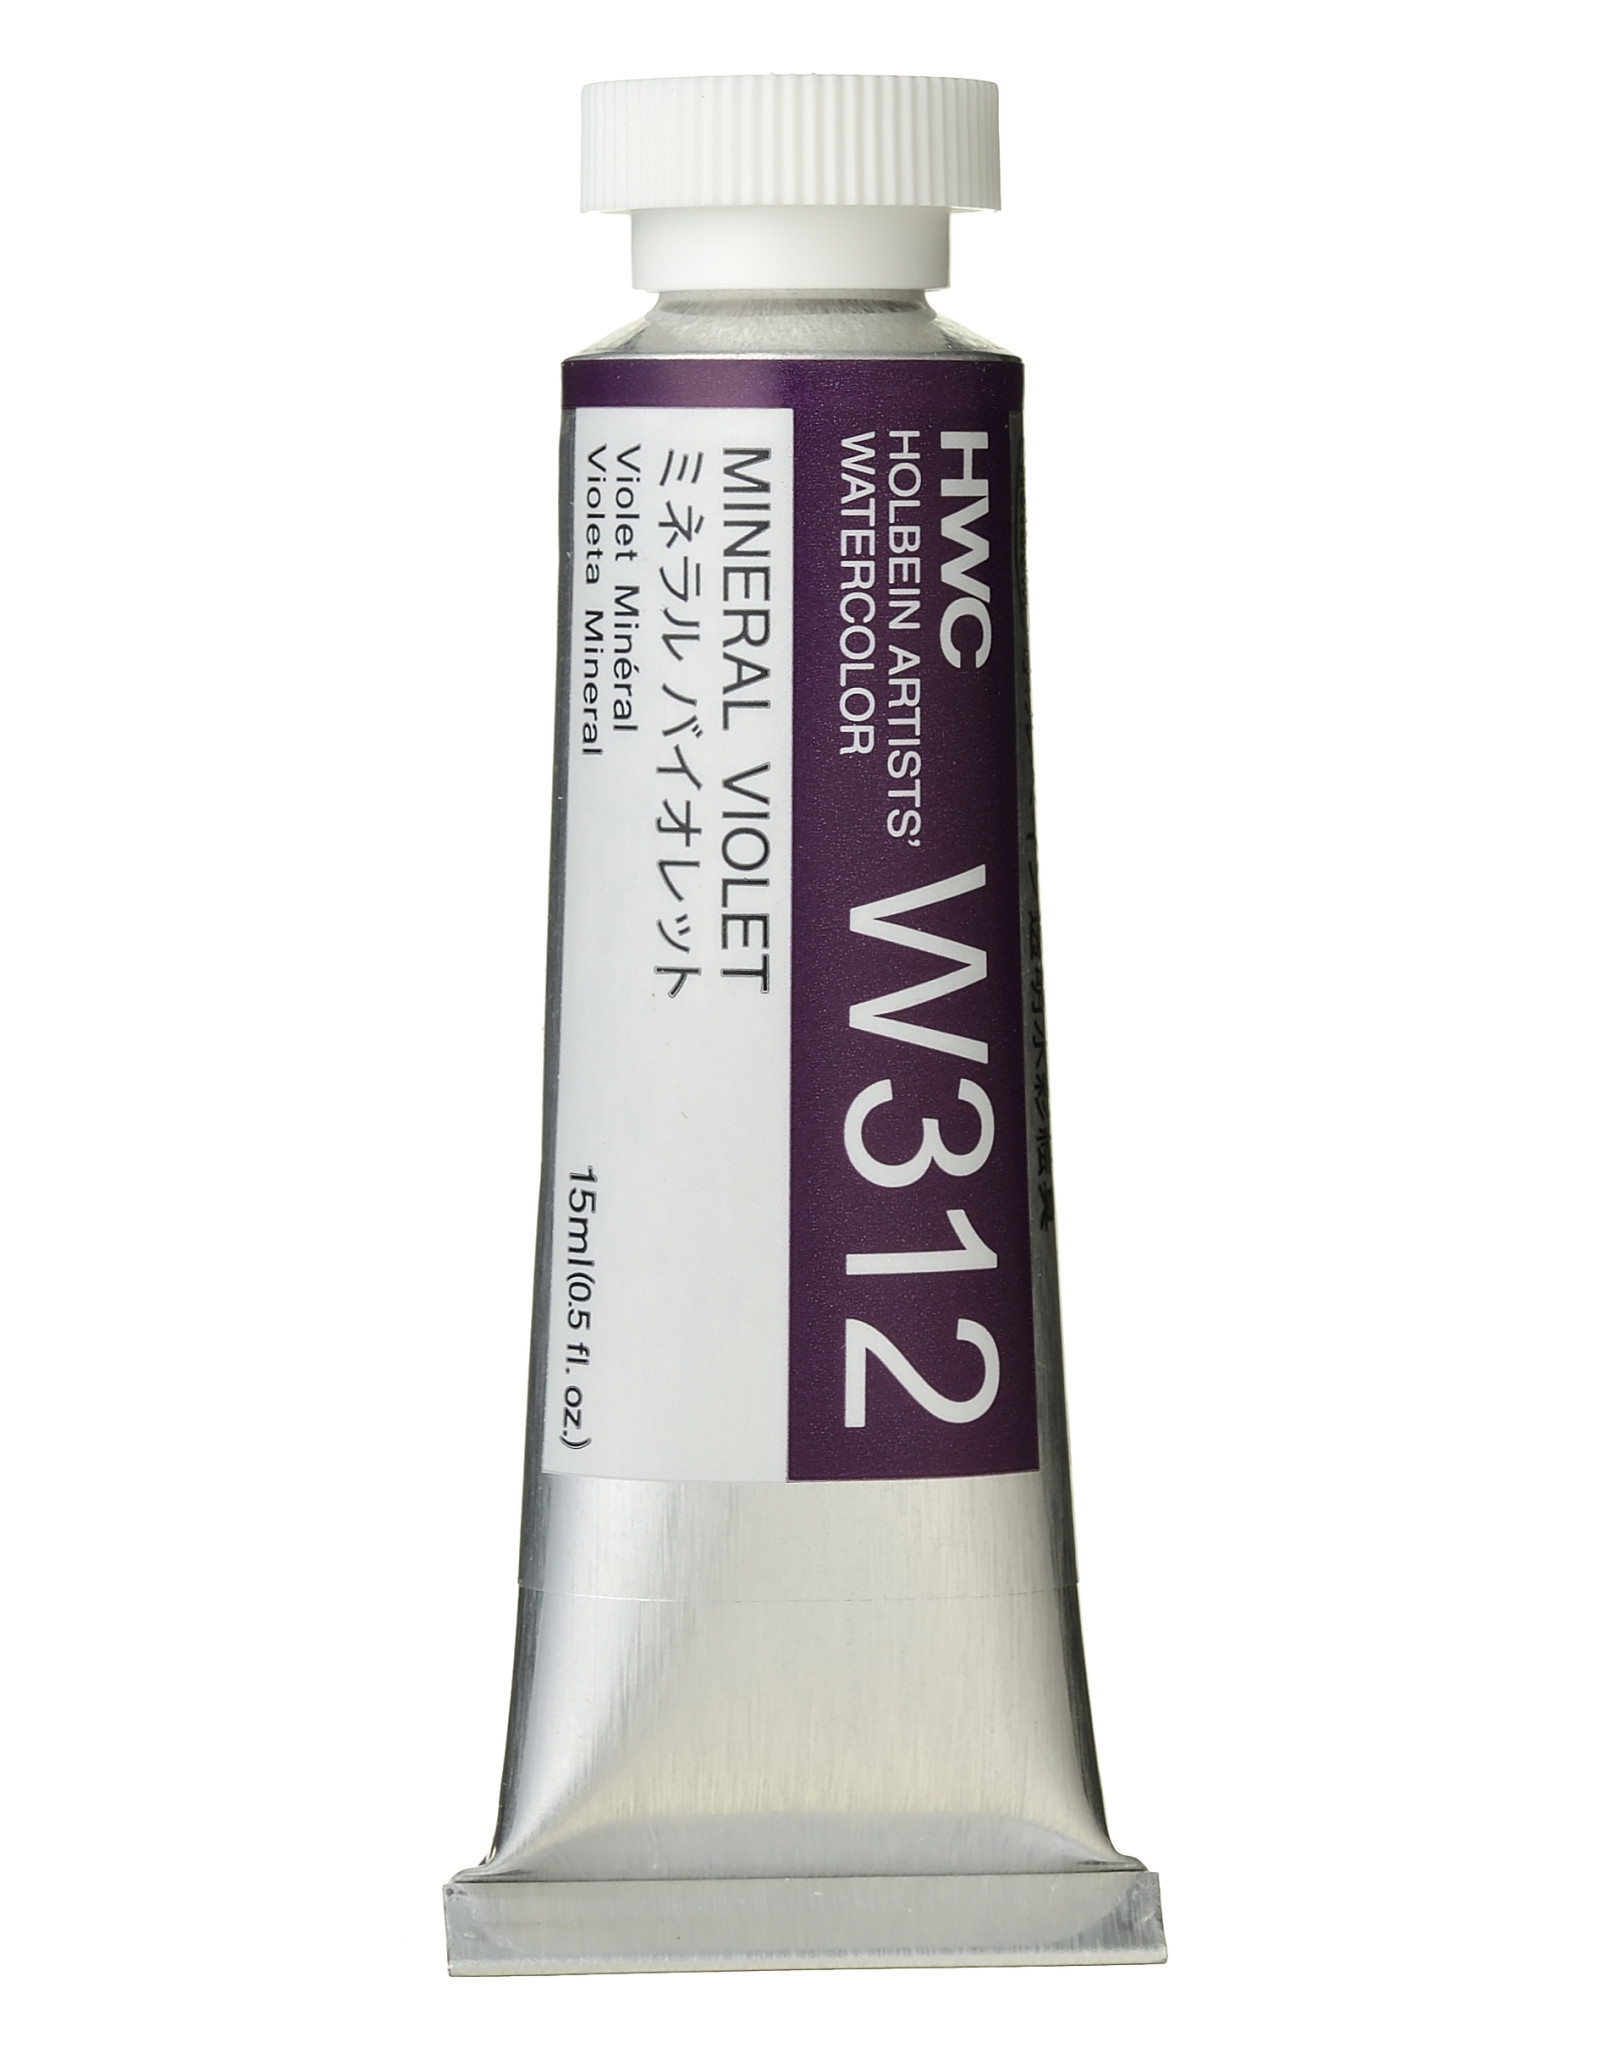 HOLBEIN Holbein Artist’s Watercolor, Mineral Violet 15ml